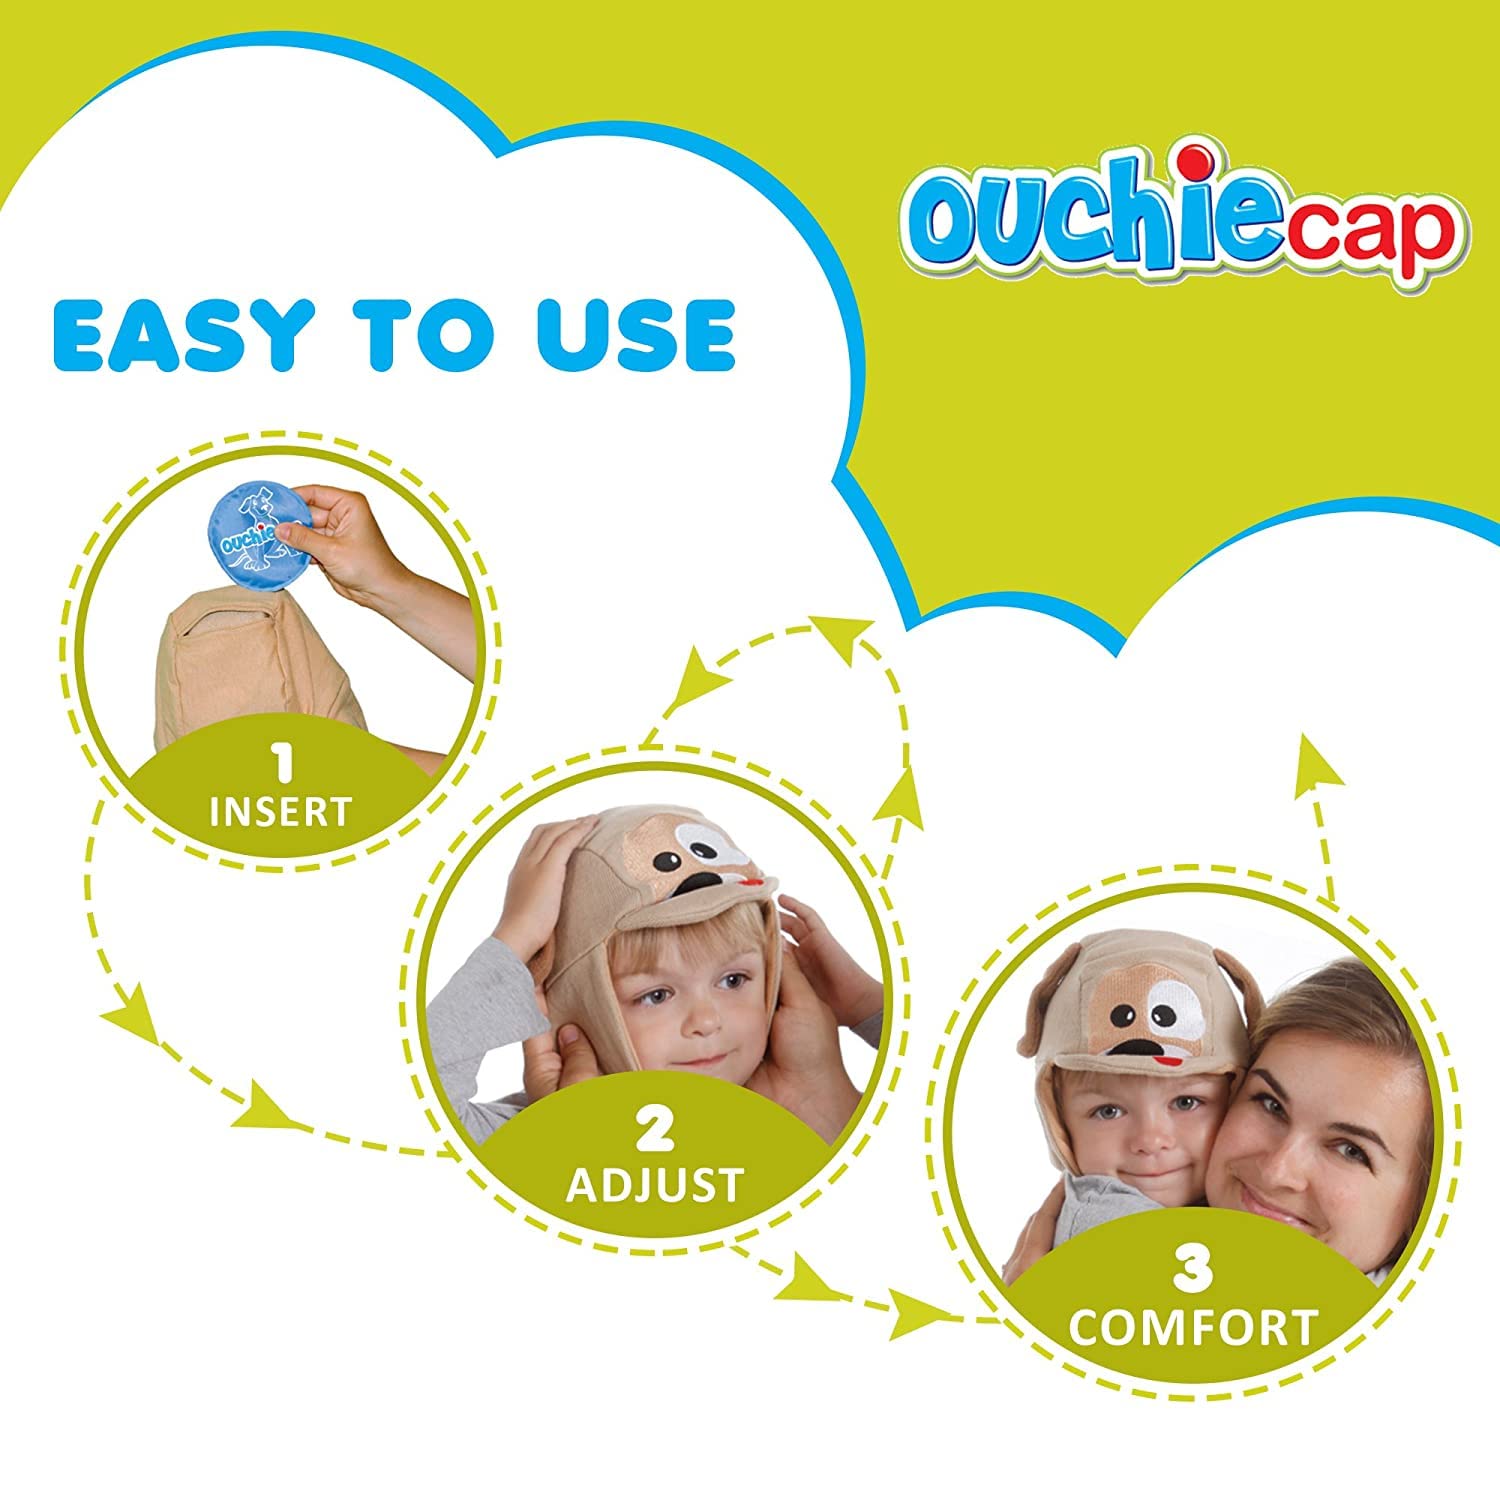 Ouchie Cap is easy to use!